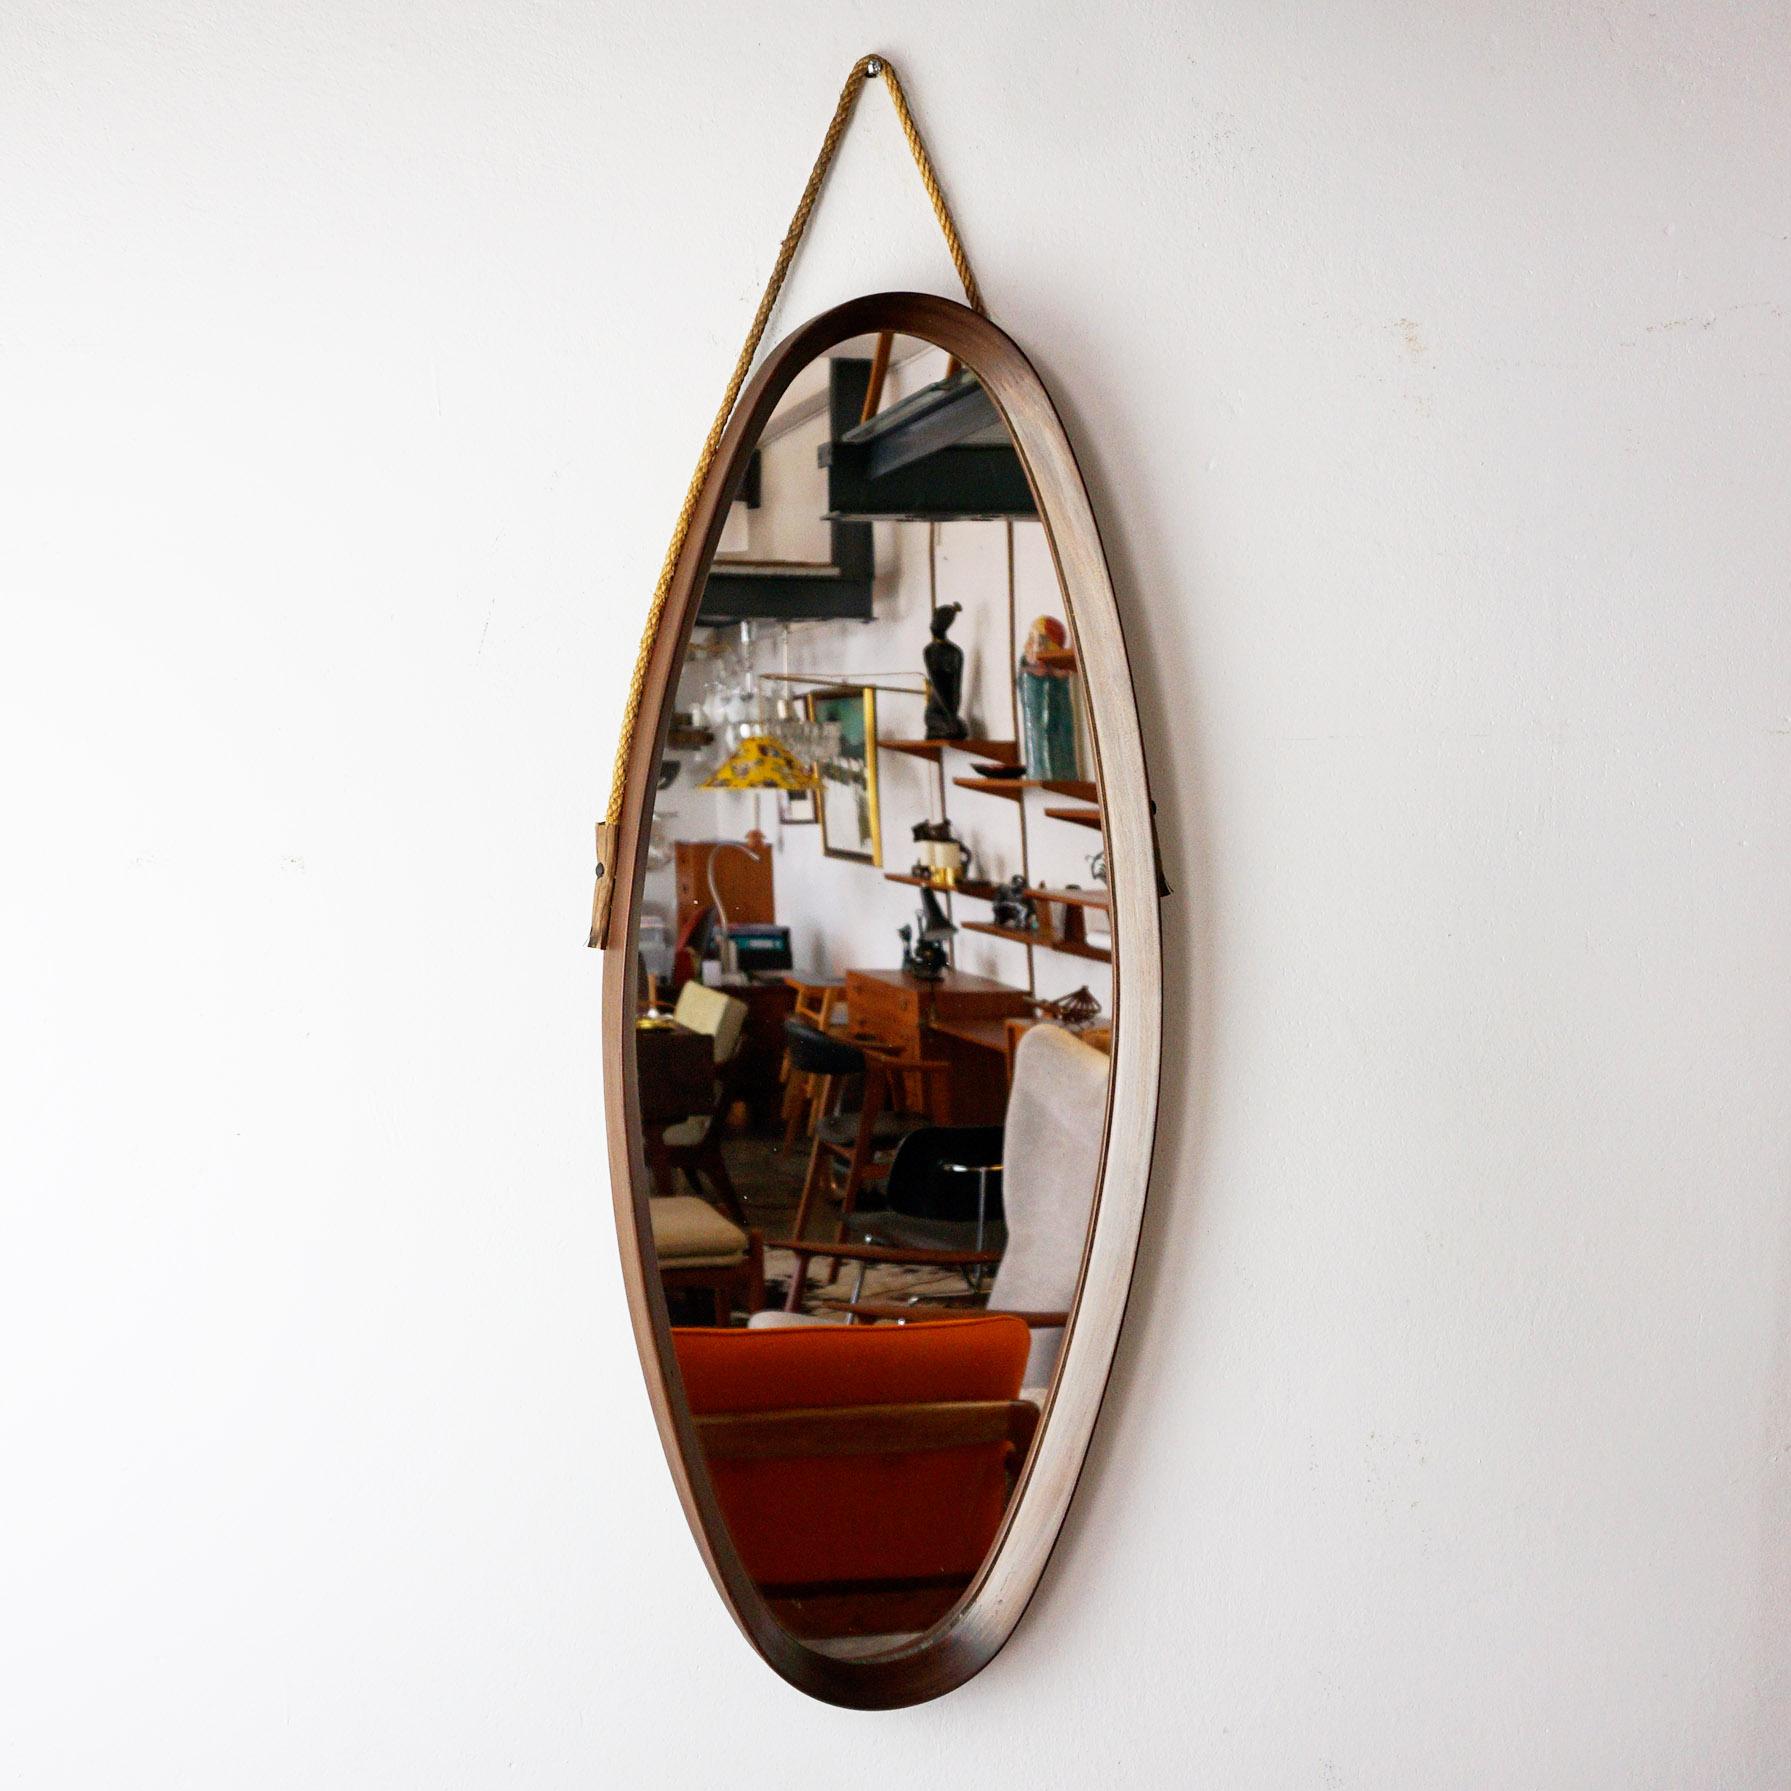 Mid-20th Century Italian Midcentury Oval Rosewood Wall Mirror with Rope